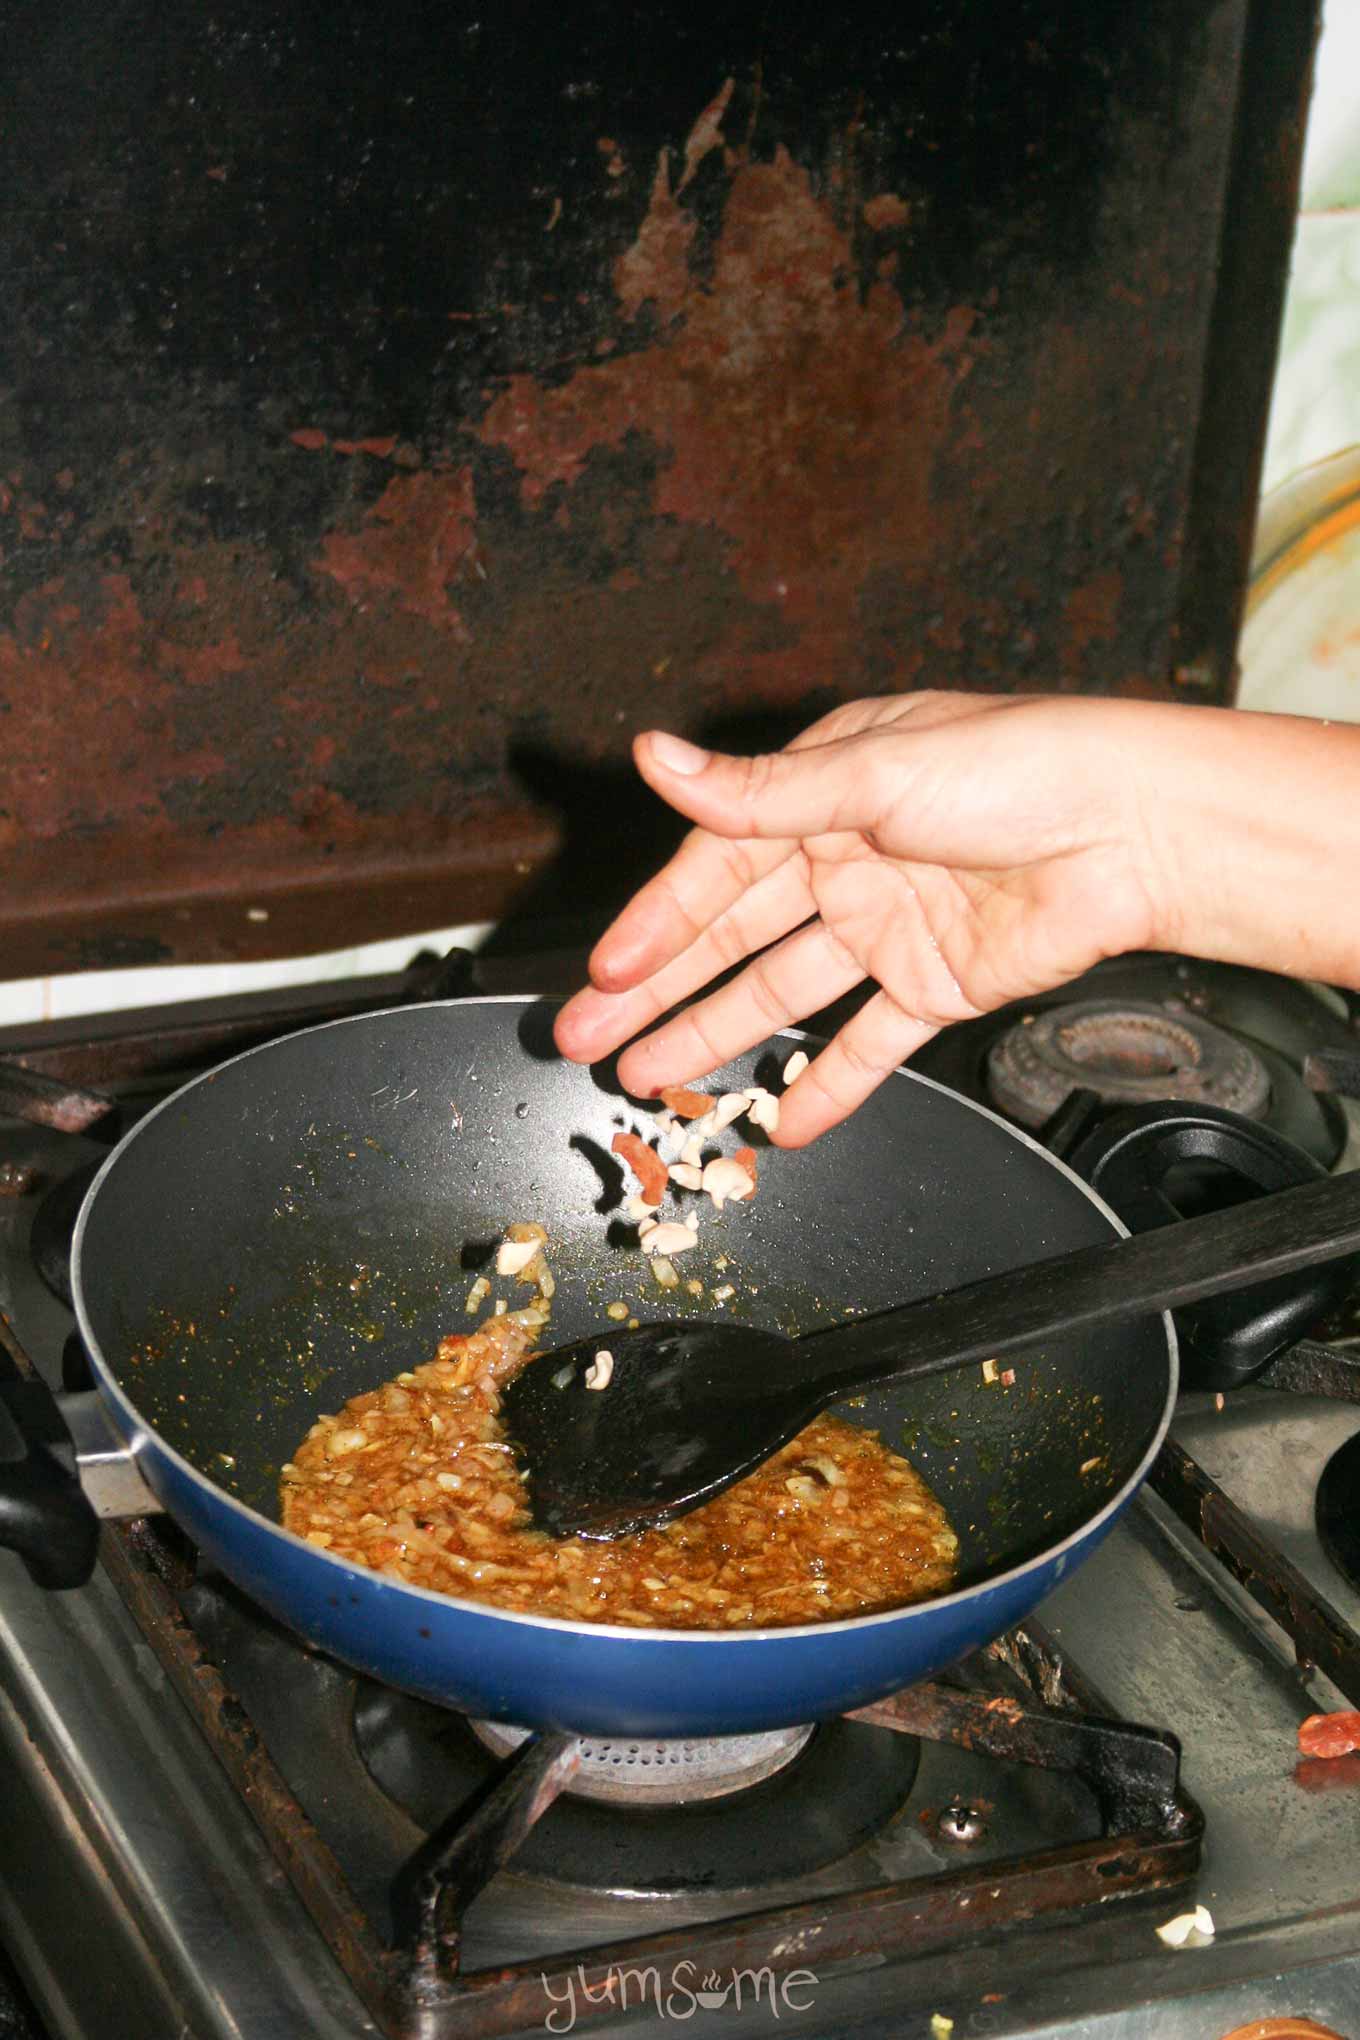 Usha's hand adding some ingredients to a kadai of spiced onions and garlic.